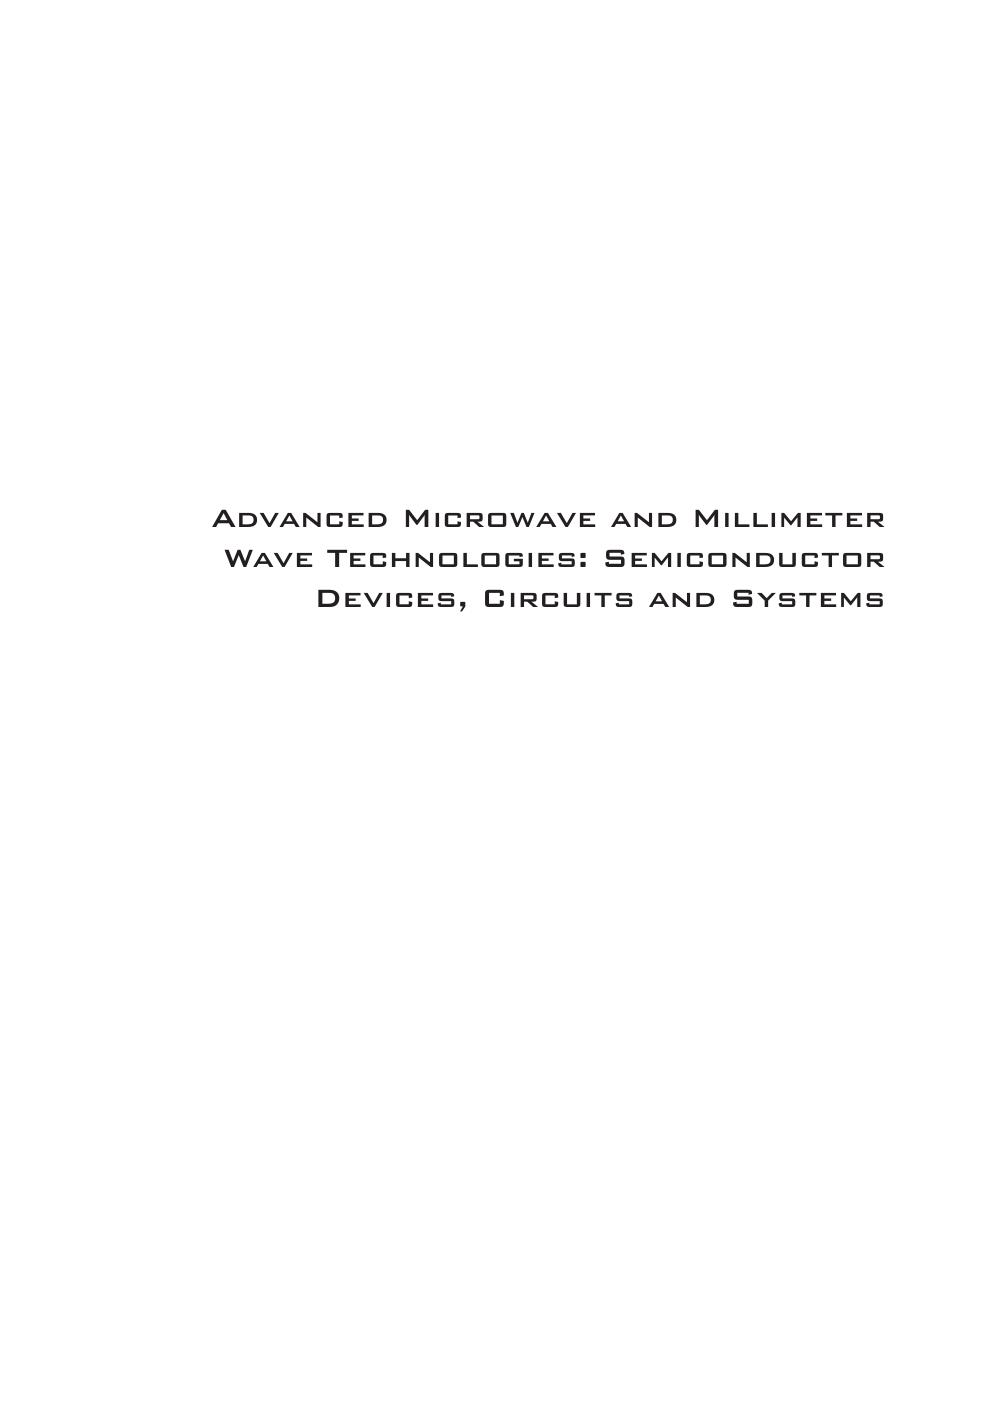 Advanced Microwave and Millimeter Wave Technologies Semiconductor Devices Circuits and Systems 2010.pdf